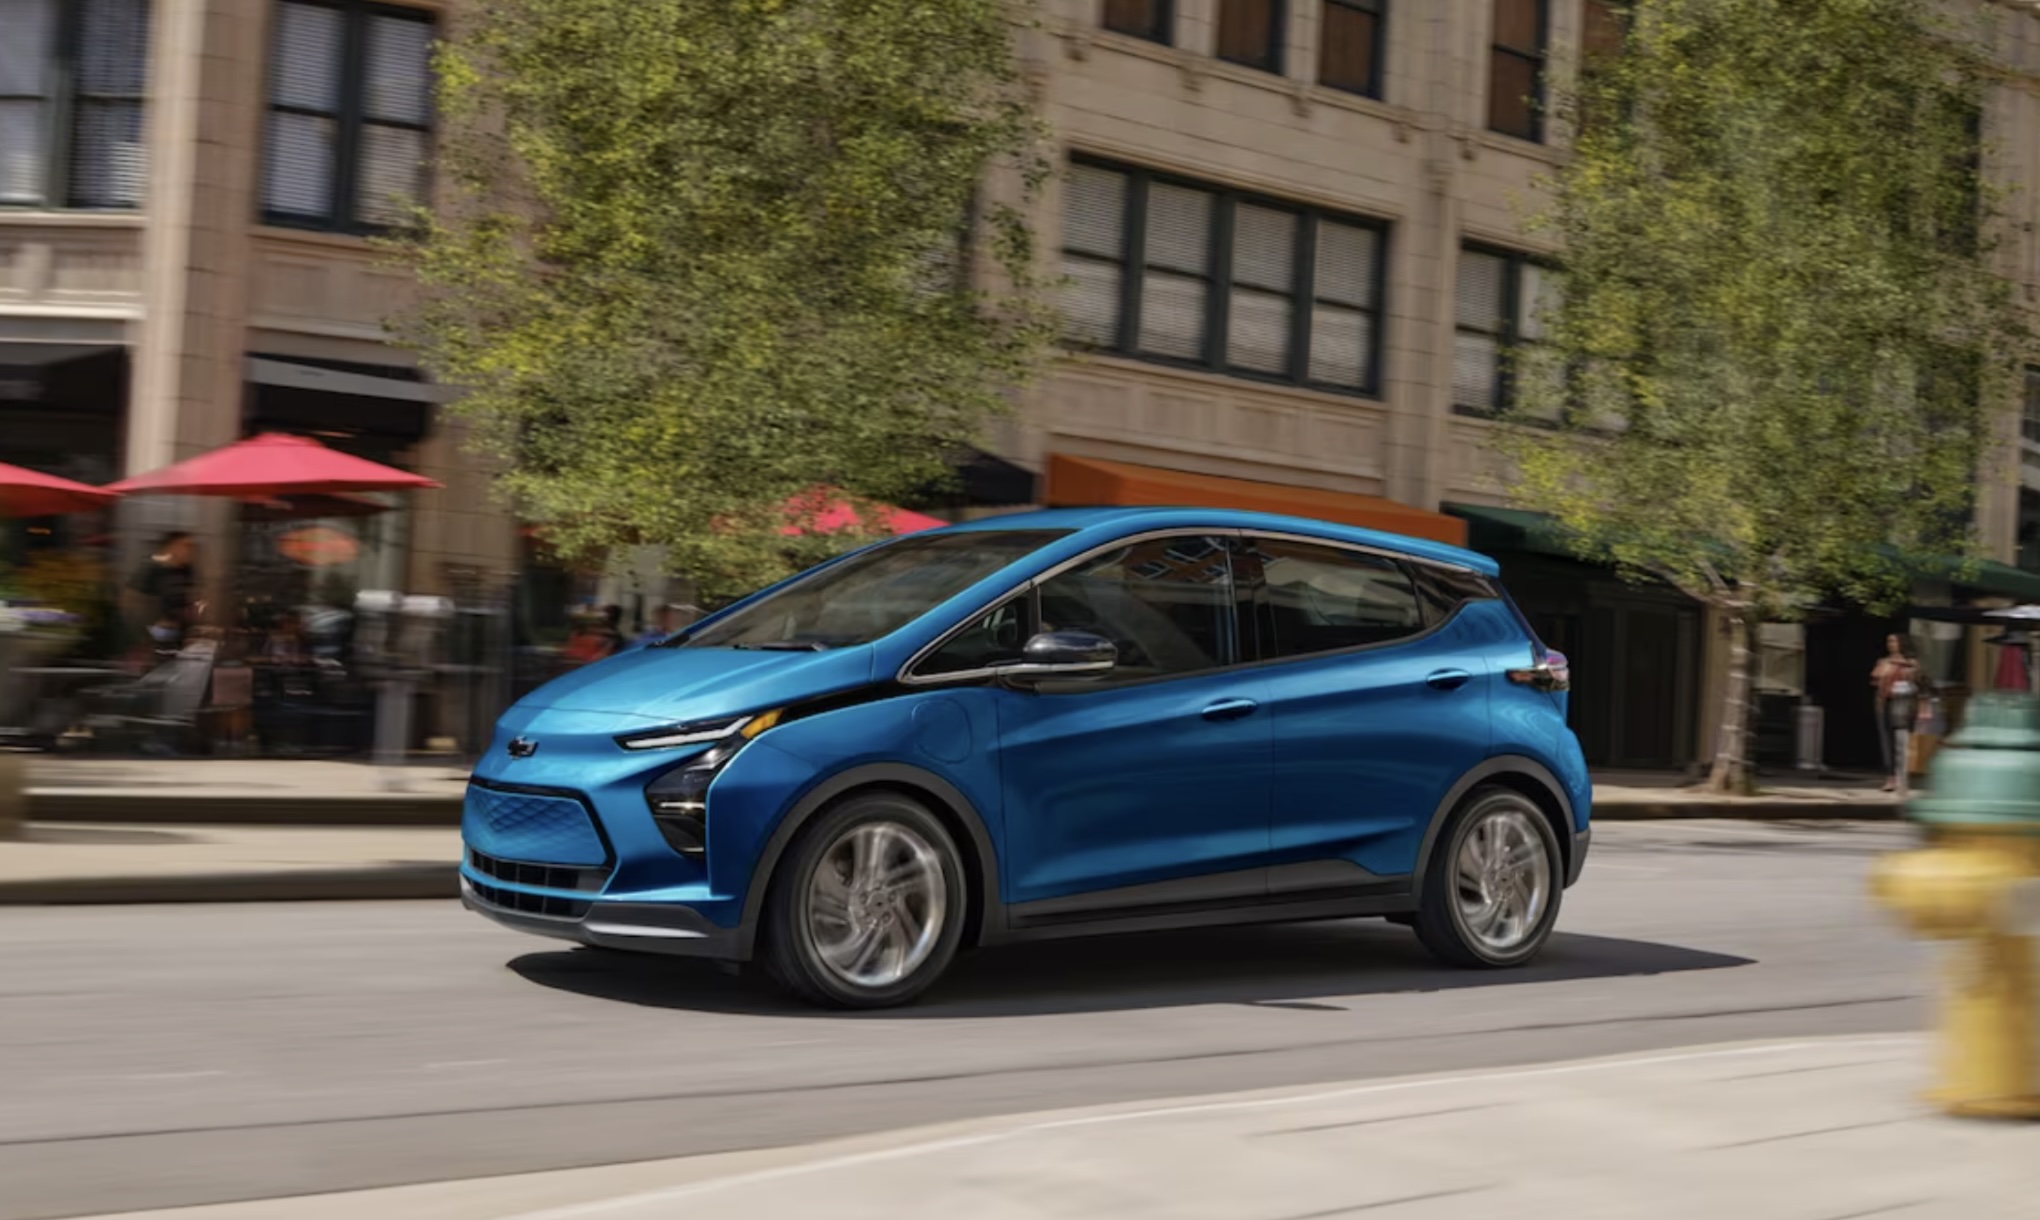 GM Invests in Kansas for Next Gen Chevy Bolt Production